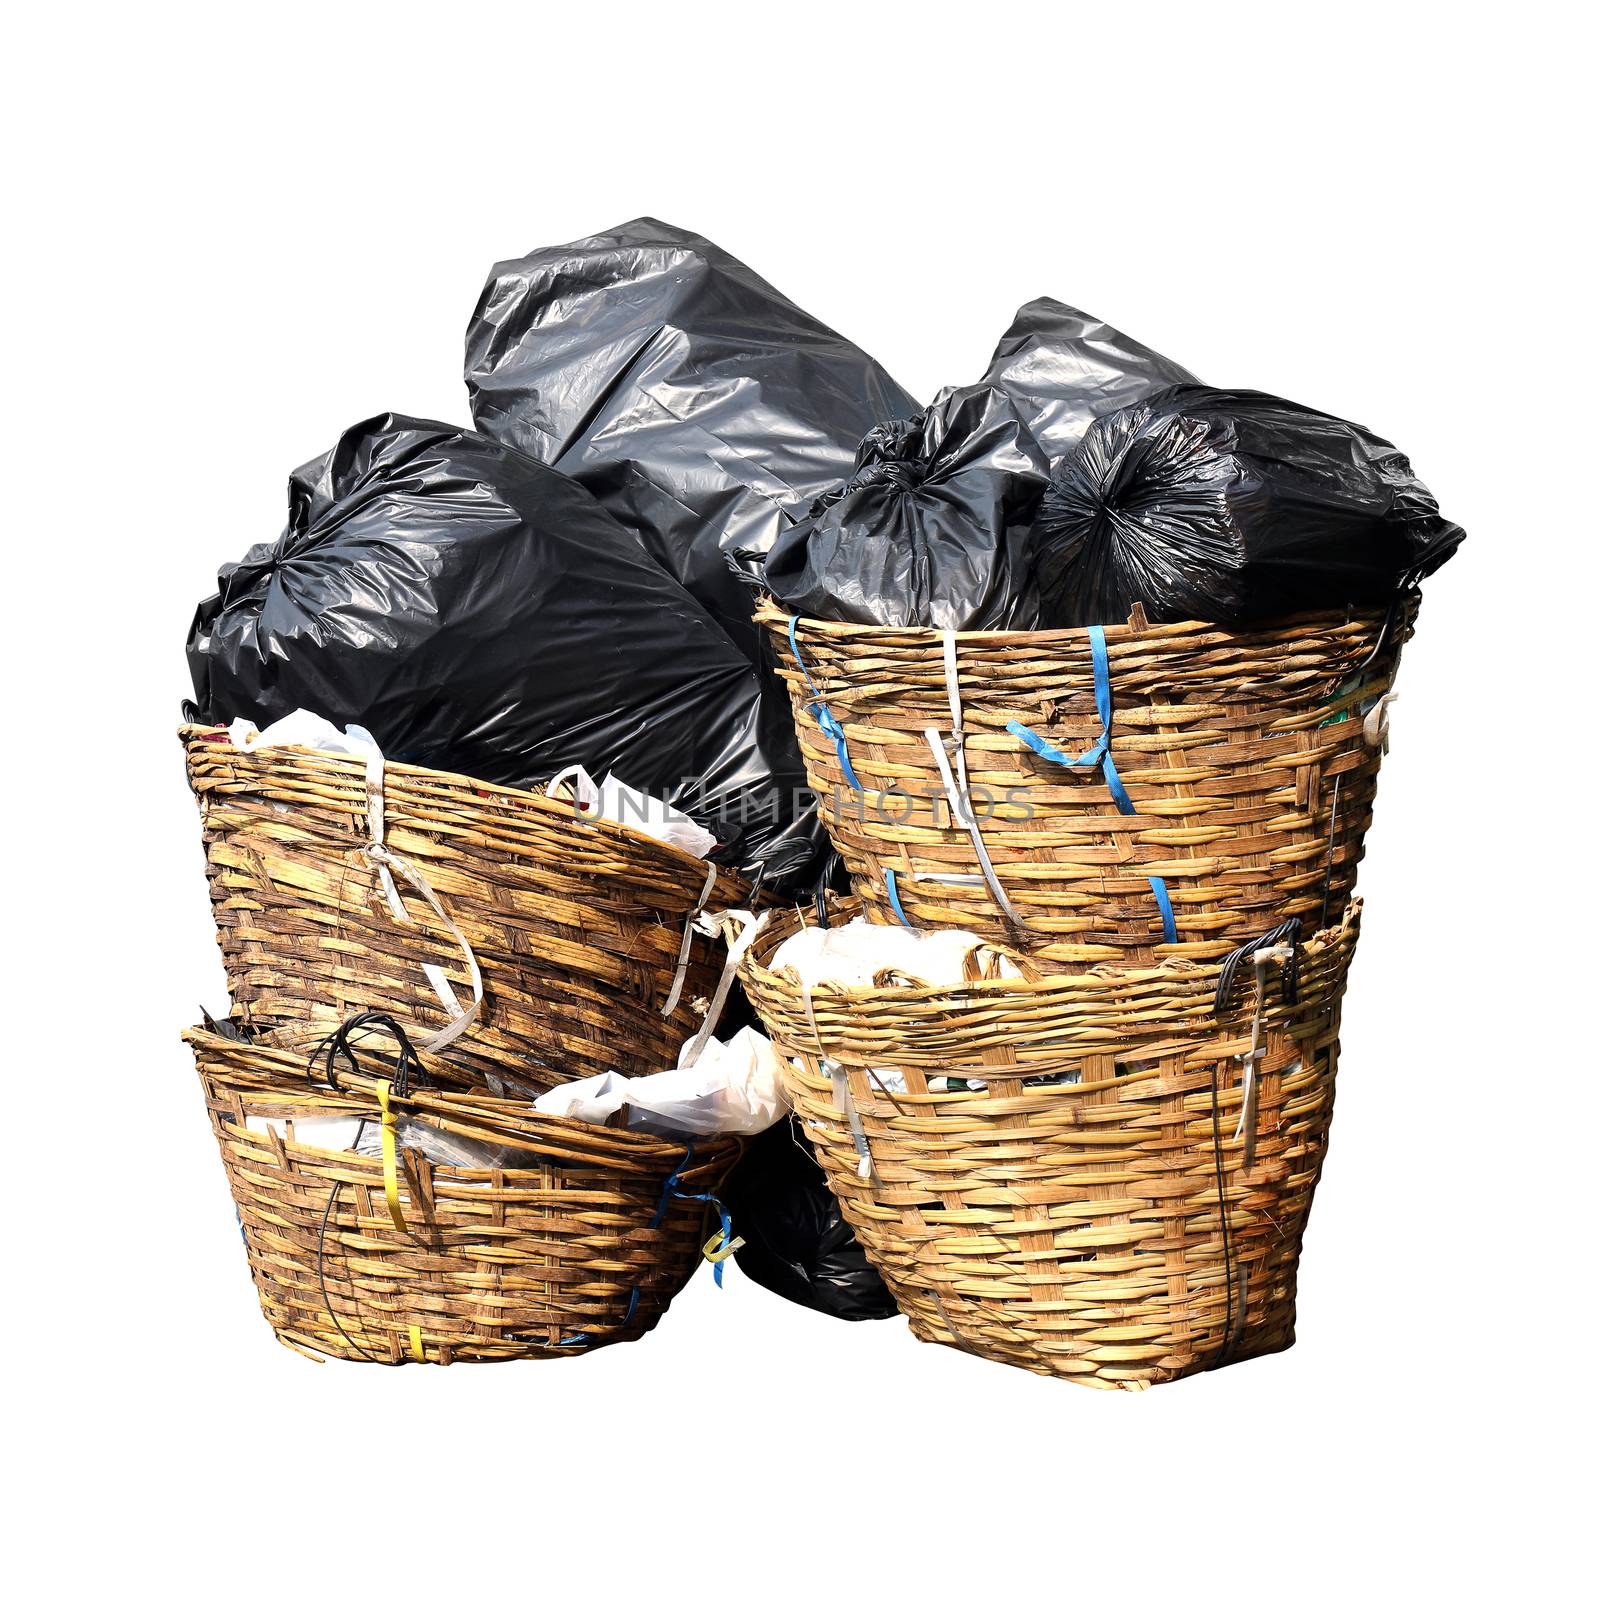 garbage is pile lots dump isolated white background, many garbage plastic bags black waste in basket bin, pollution from trash plastic waste garbage, bags bin of plastic waste, pile garbage waste bin by cgdeaw